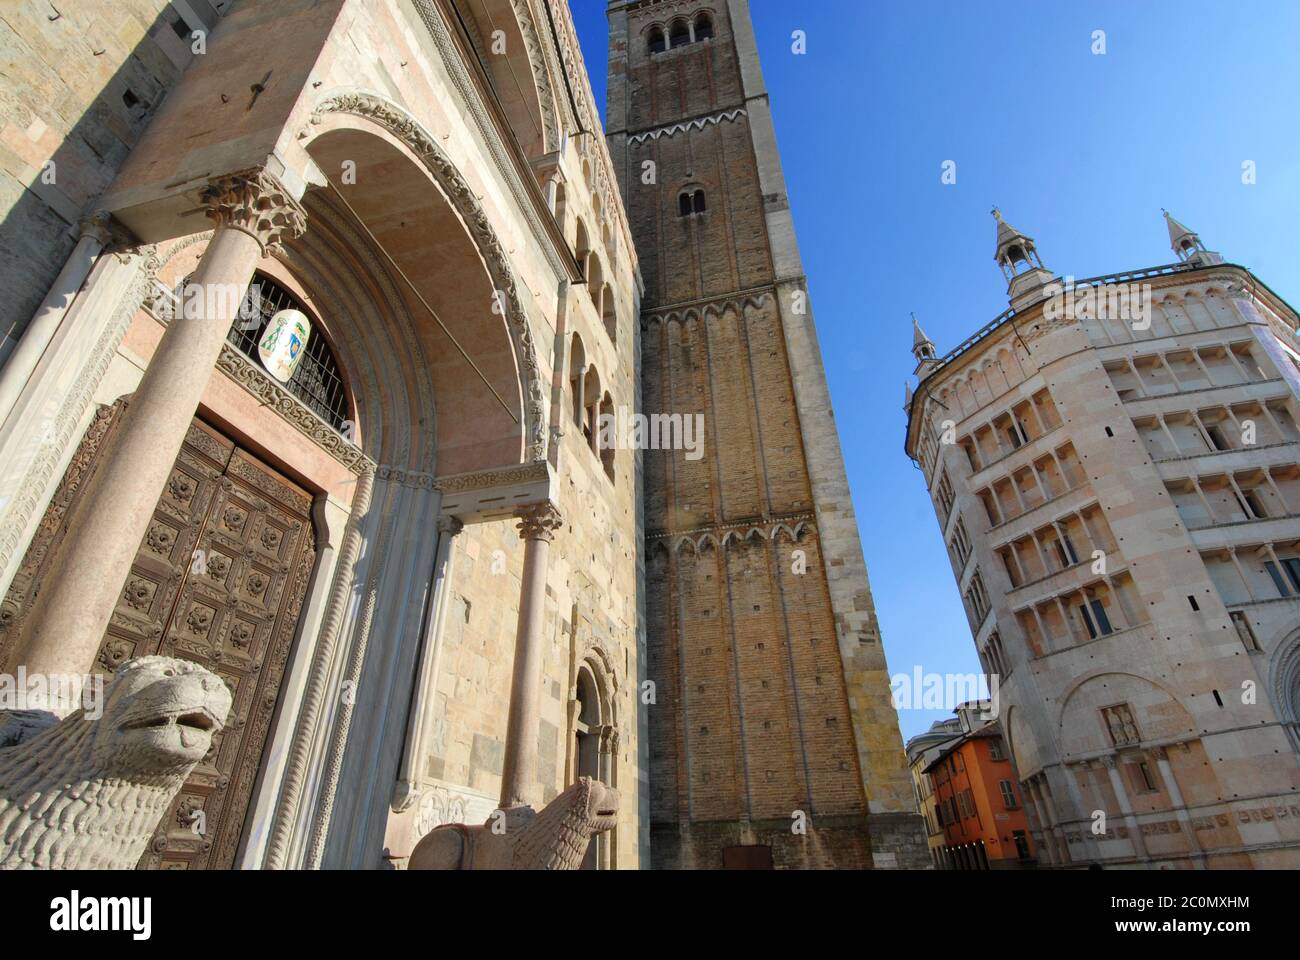 Parma is the Italian capital of culture 2020. The baptistery of Parma is located next to the cathedral of Parma, symbols of Romanesque Gothic architec Stock Photo